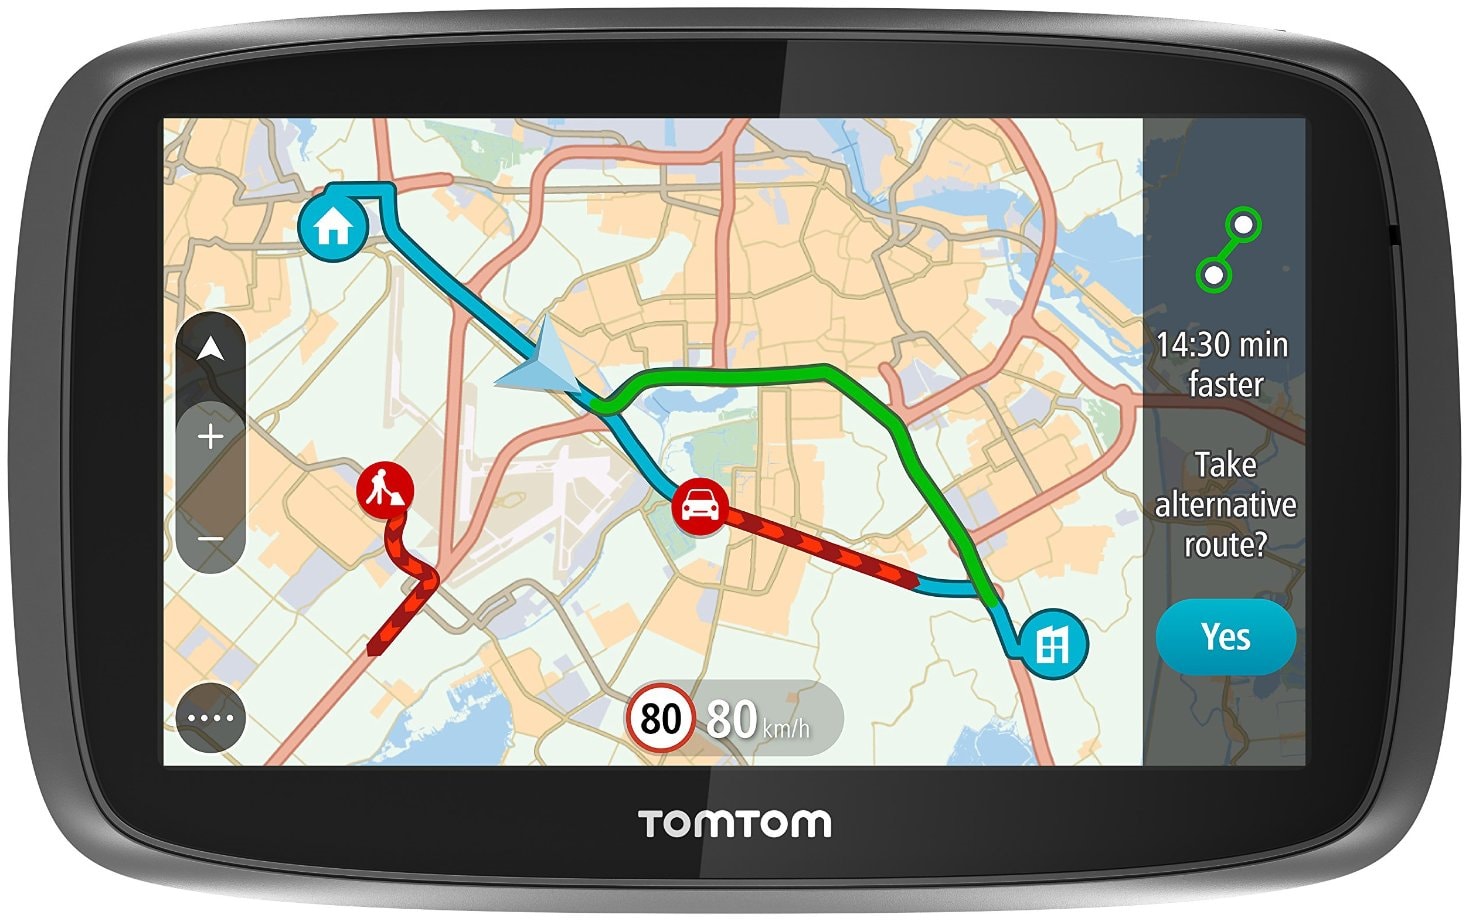 Gps Traceur Voiture pas cher - Achat neuf et occasion